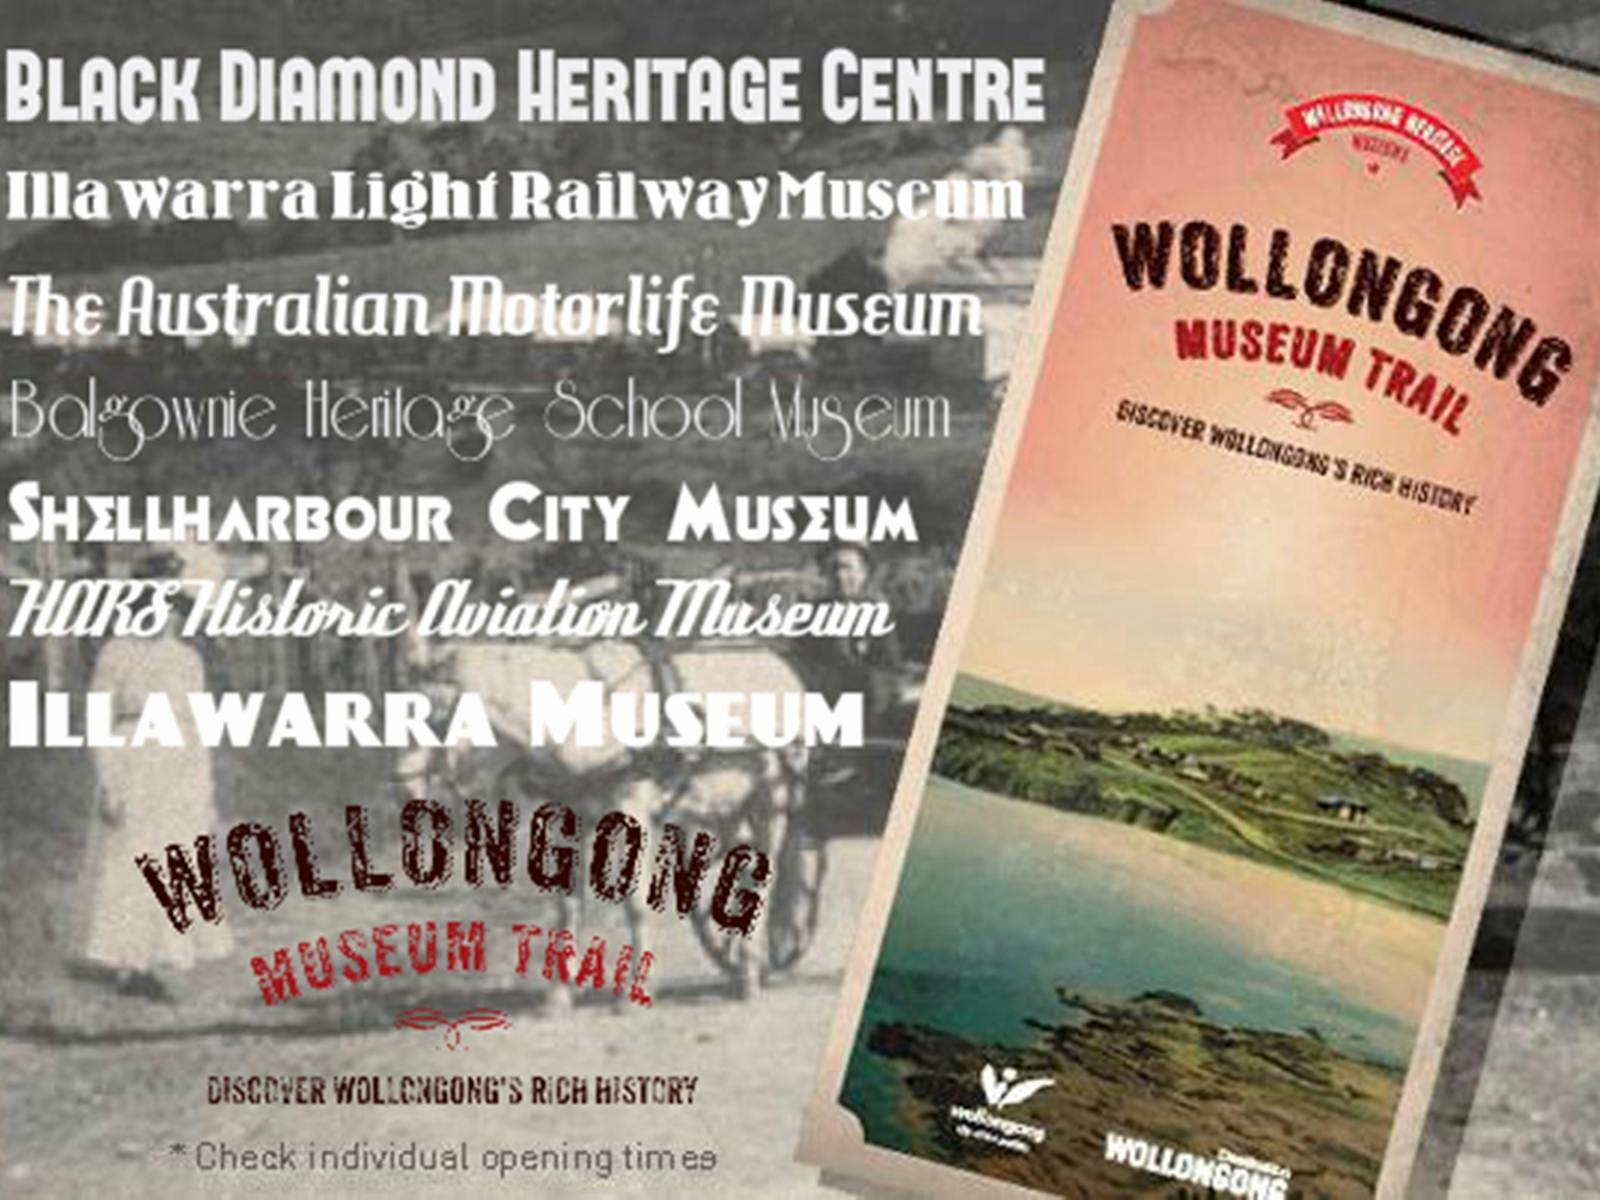 Image for Wollongong Museum Trail